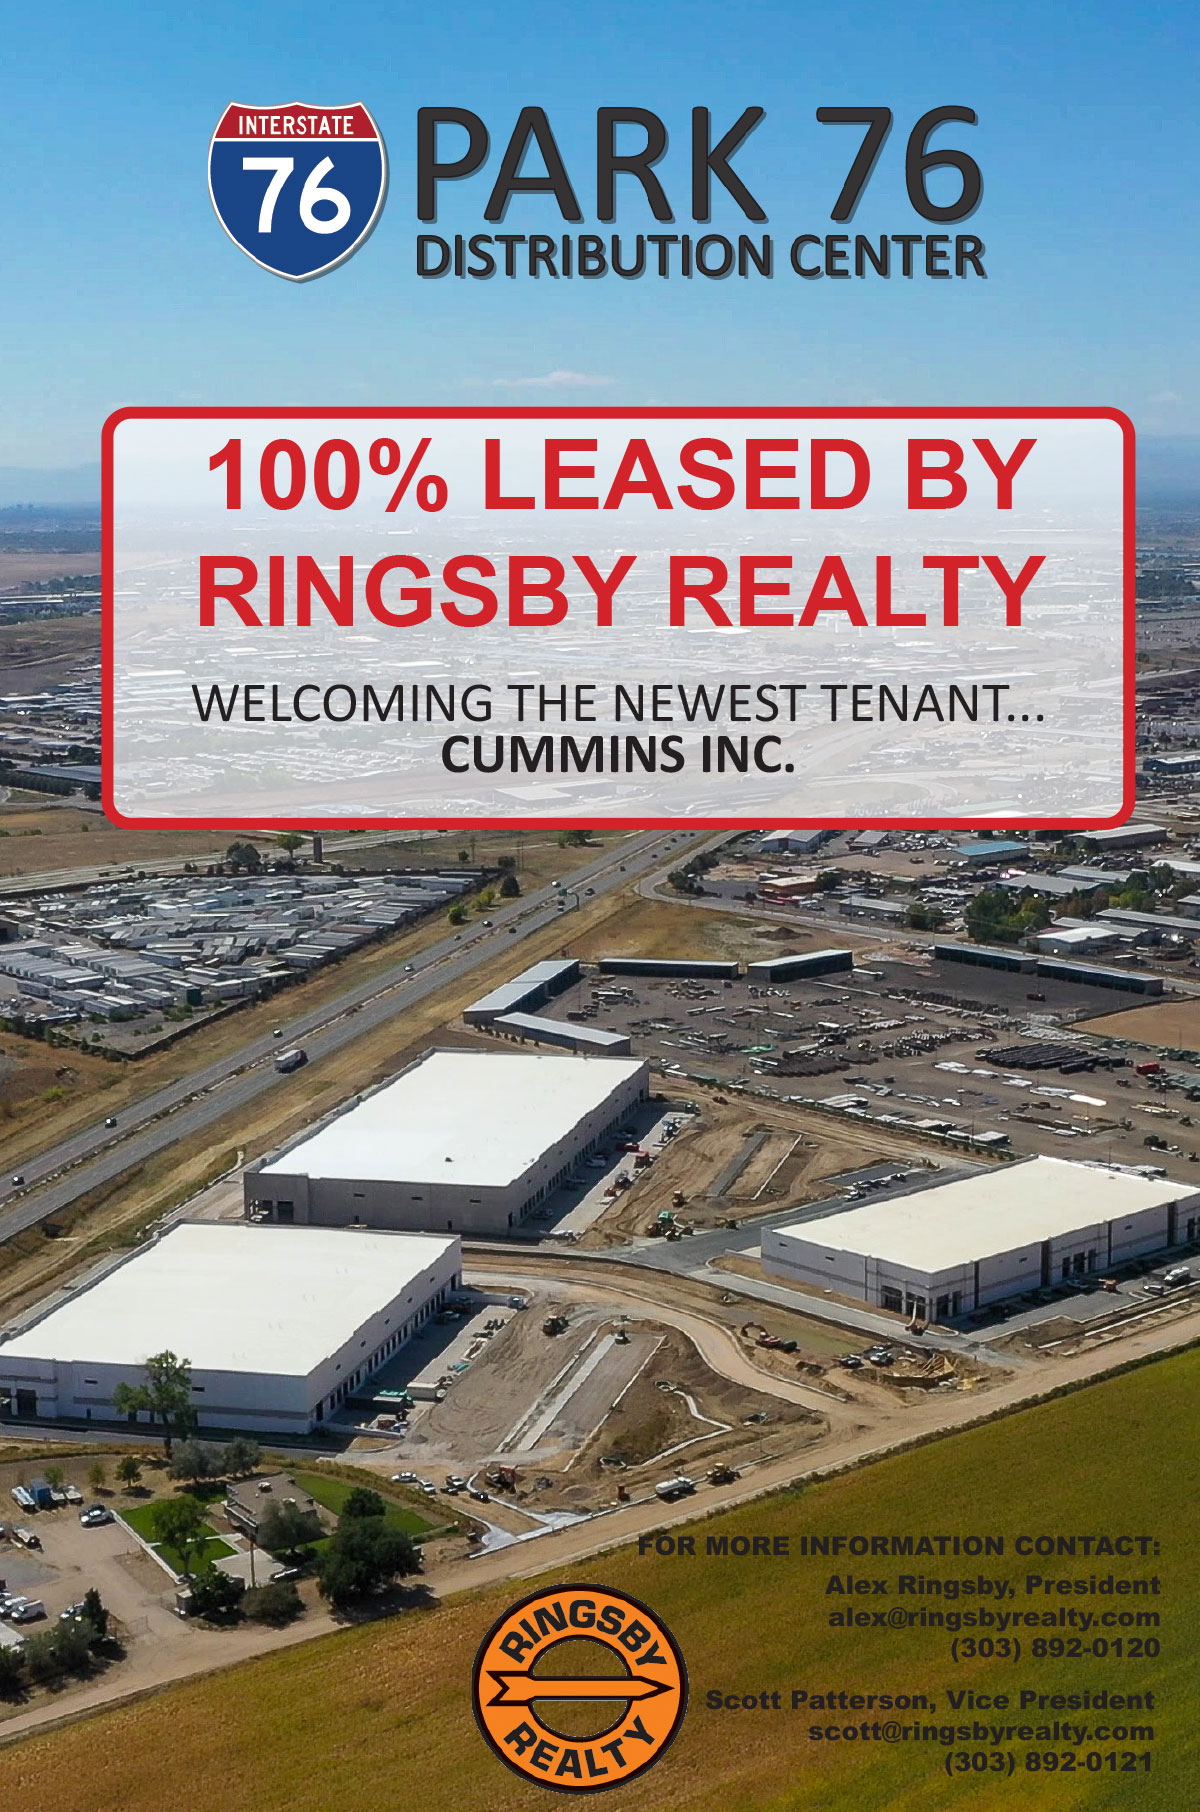 Park 76 Distribution Center - 100% Leased by Ringsby Realty